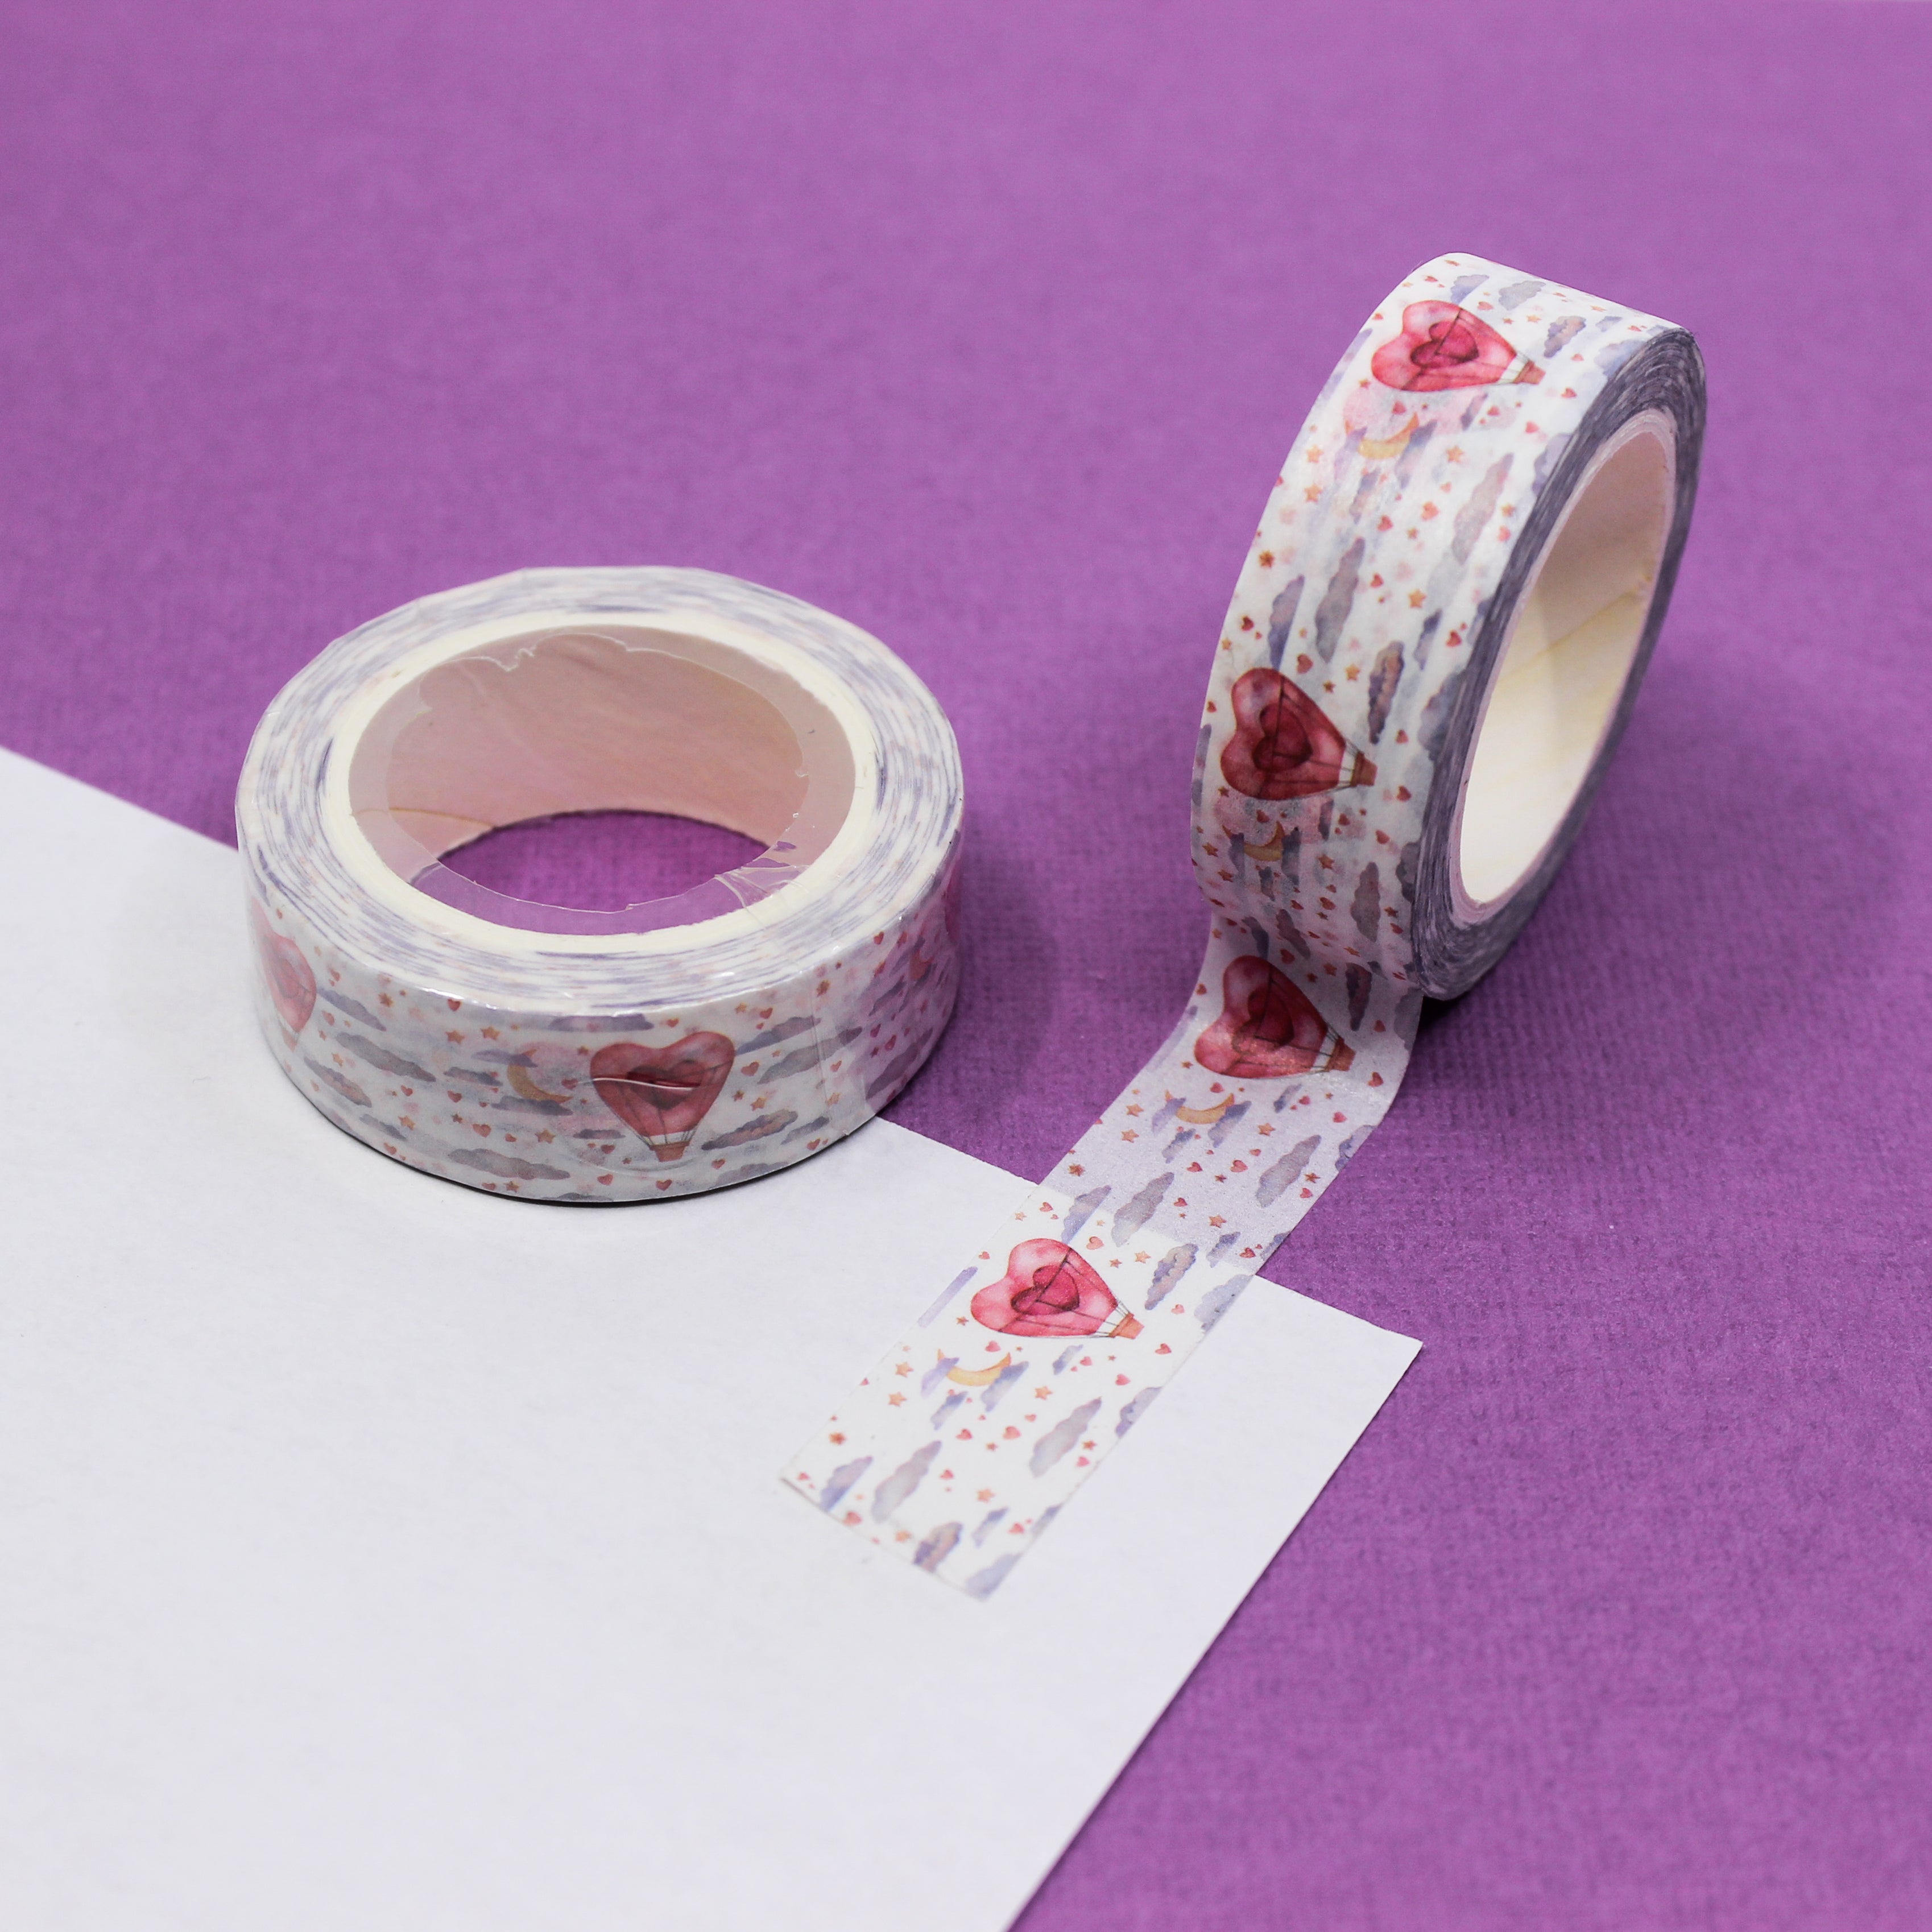 This tape featuring a heart-shaped air balloon is an expression of love that is perfect for adding a cute, romantic touch to your greeting cards, scrapbooks, planner spreads, or gift wrapping. This tape is sold at BBB Supplies Craft Shop.